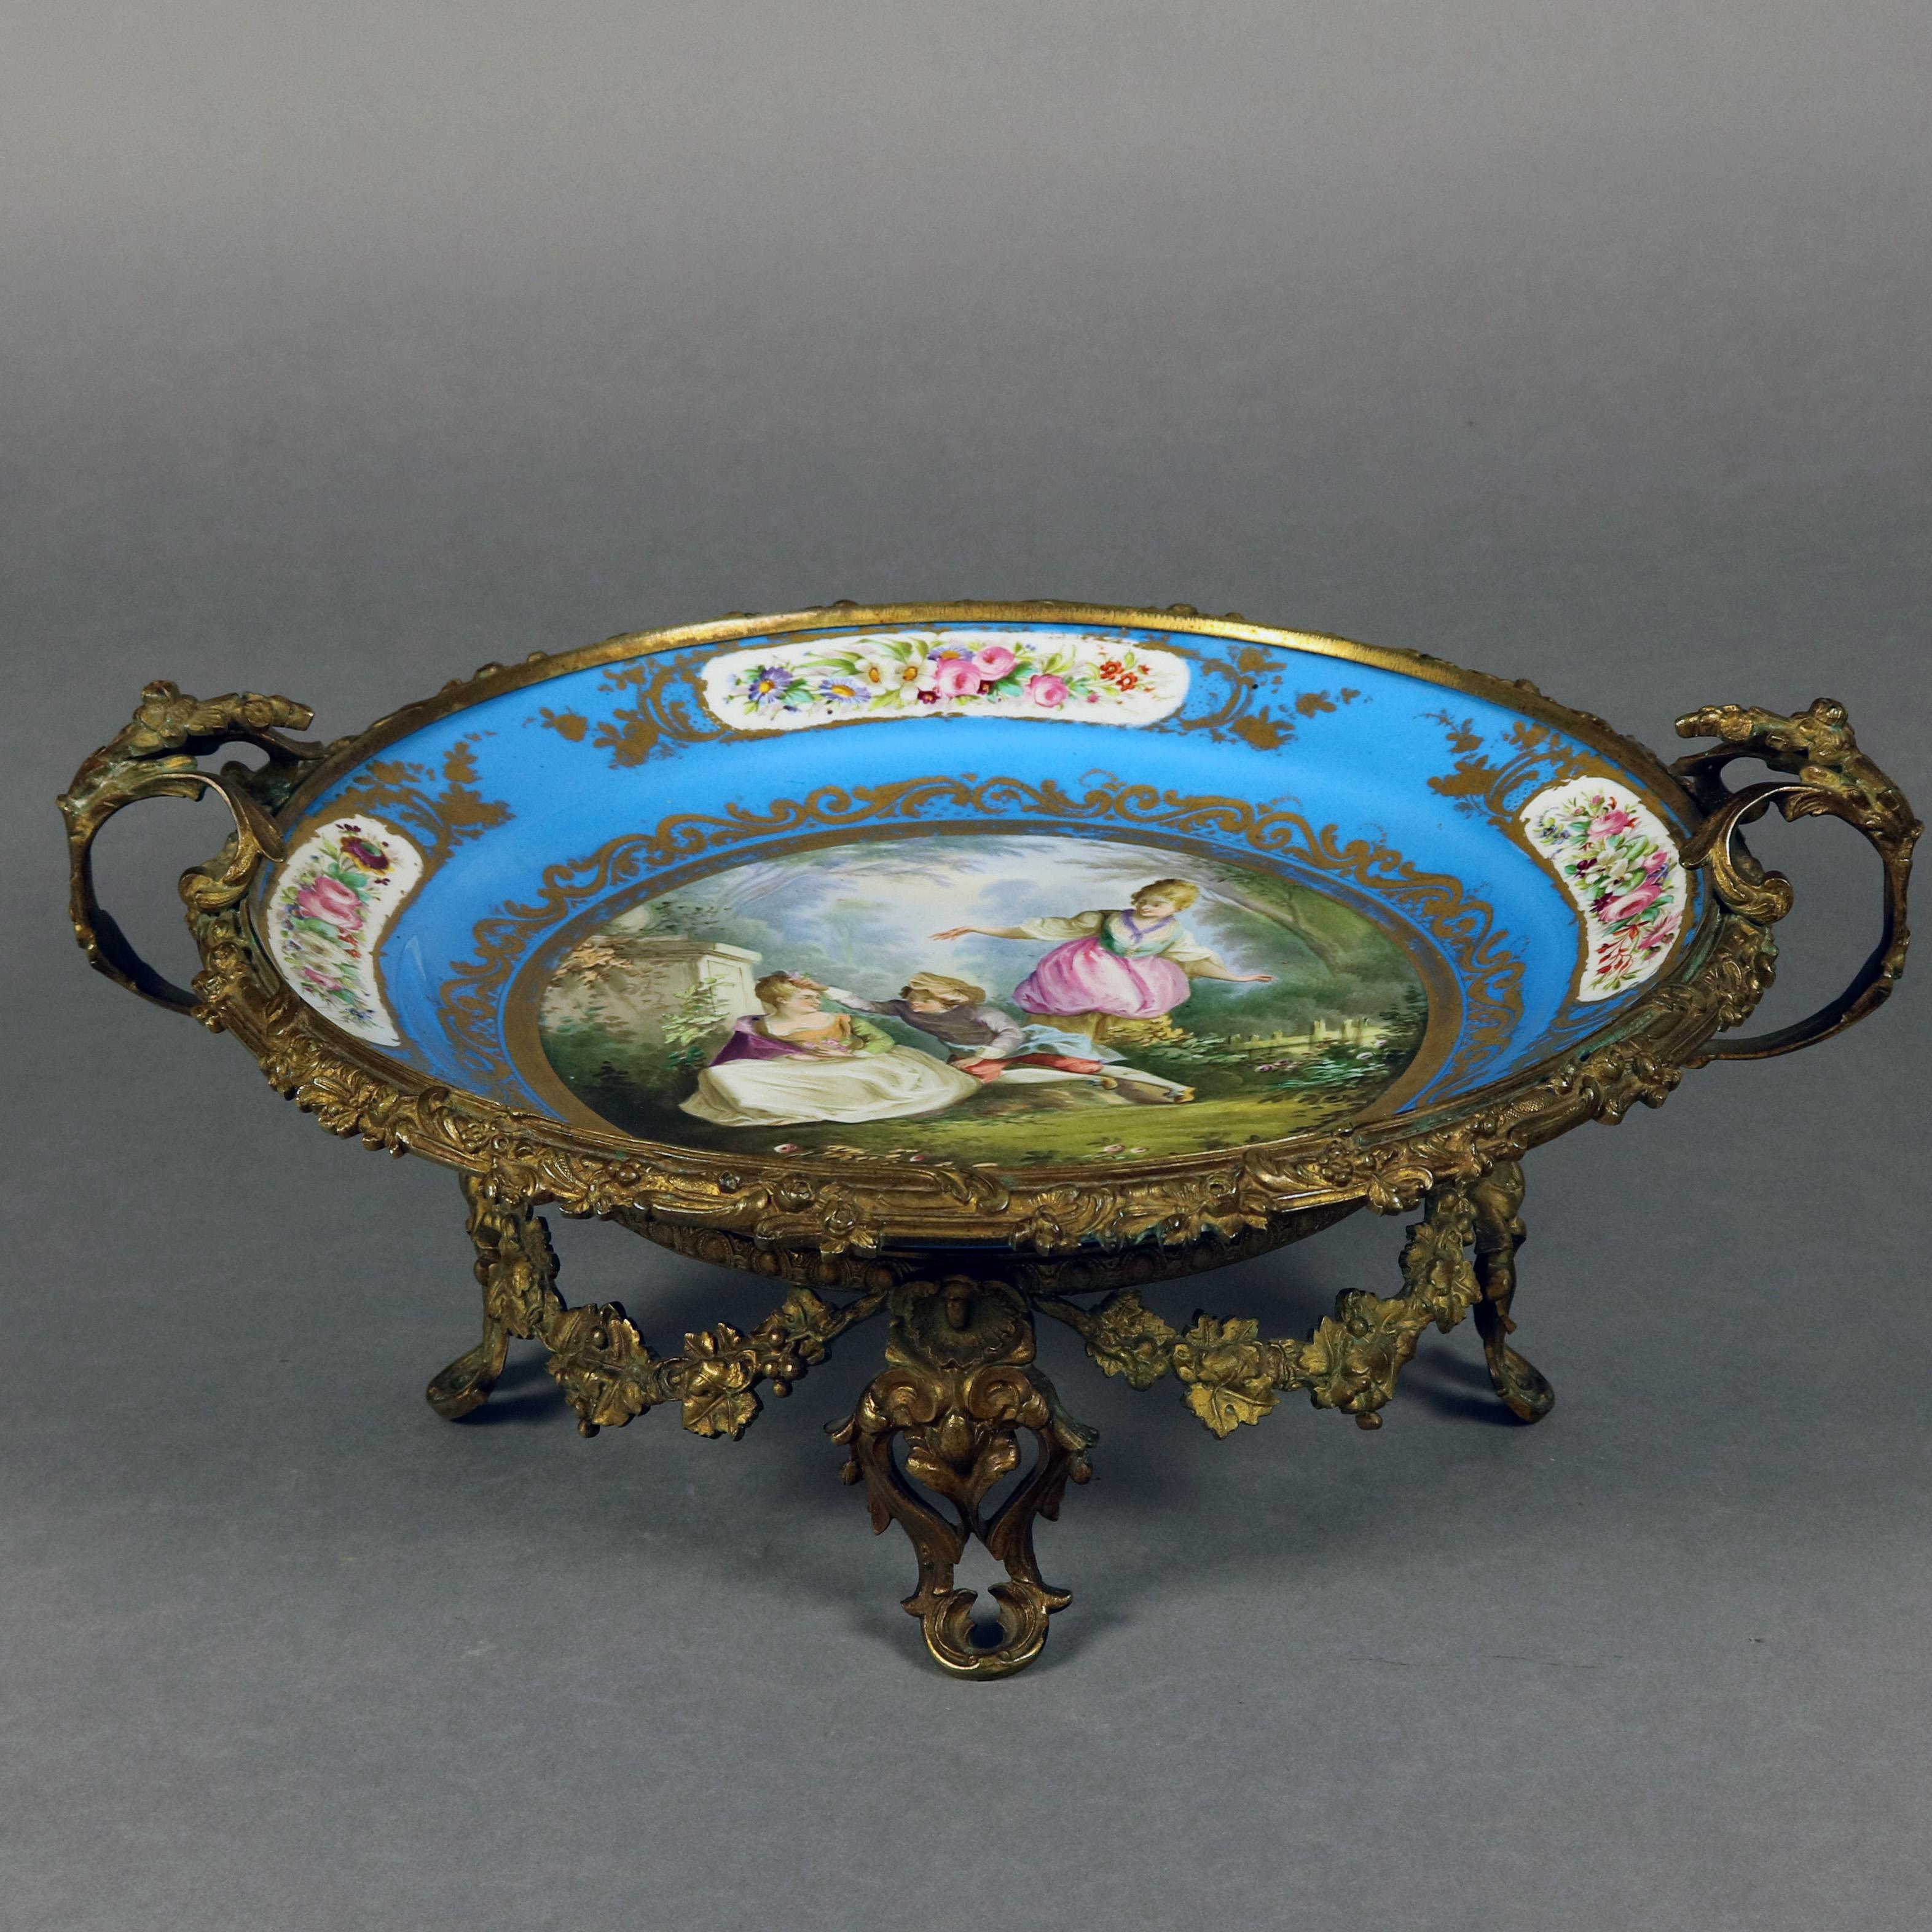 Antique Sevres Hand Painted and Gilt Pictorial Porcelain and Ormolu Charger 1